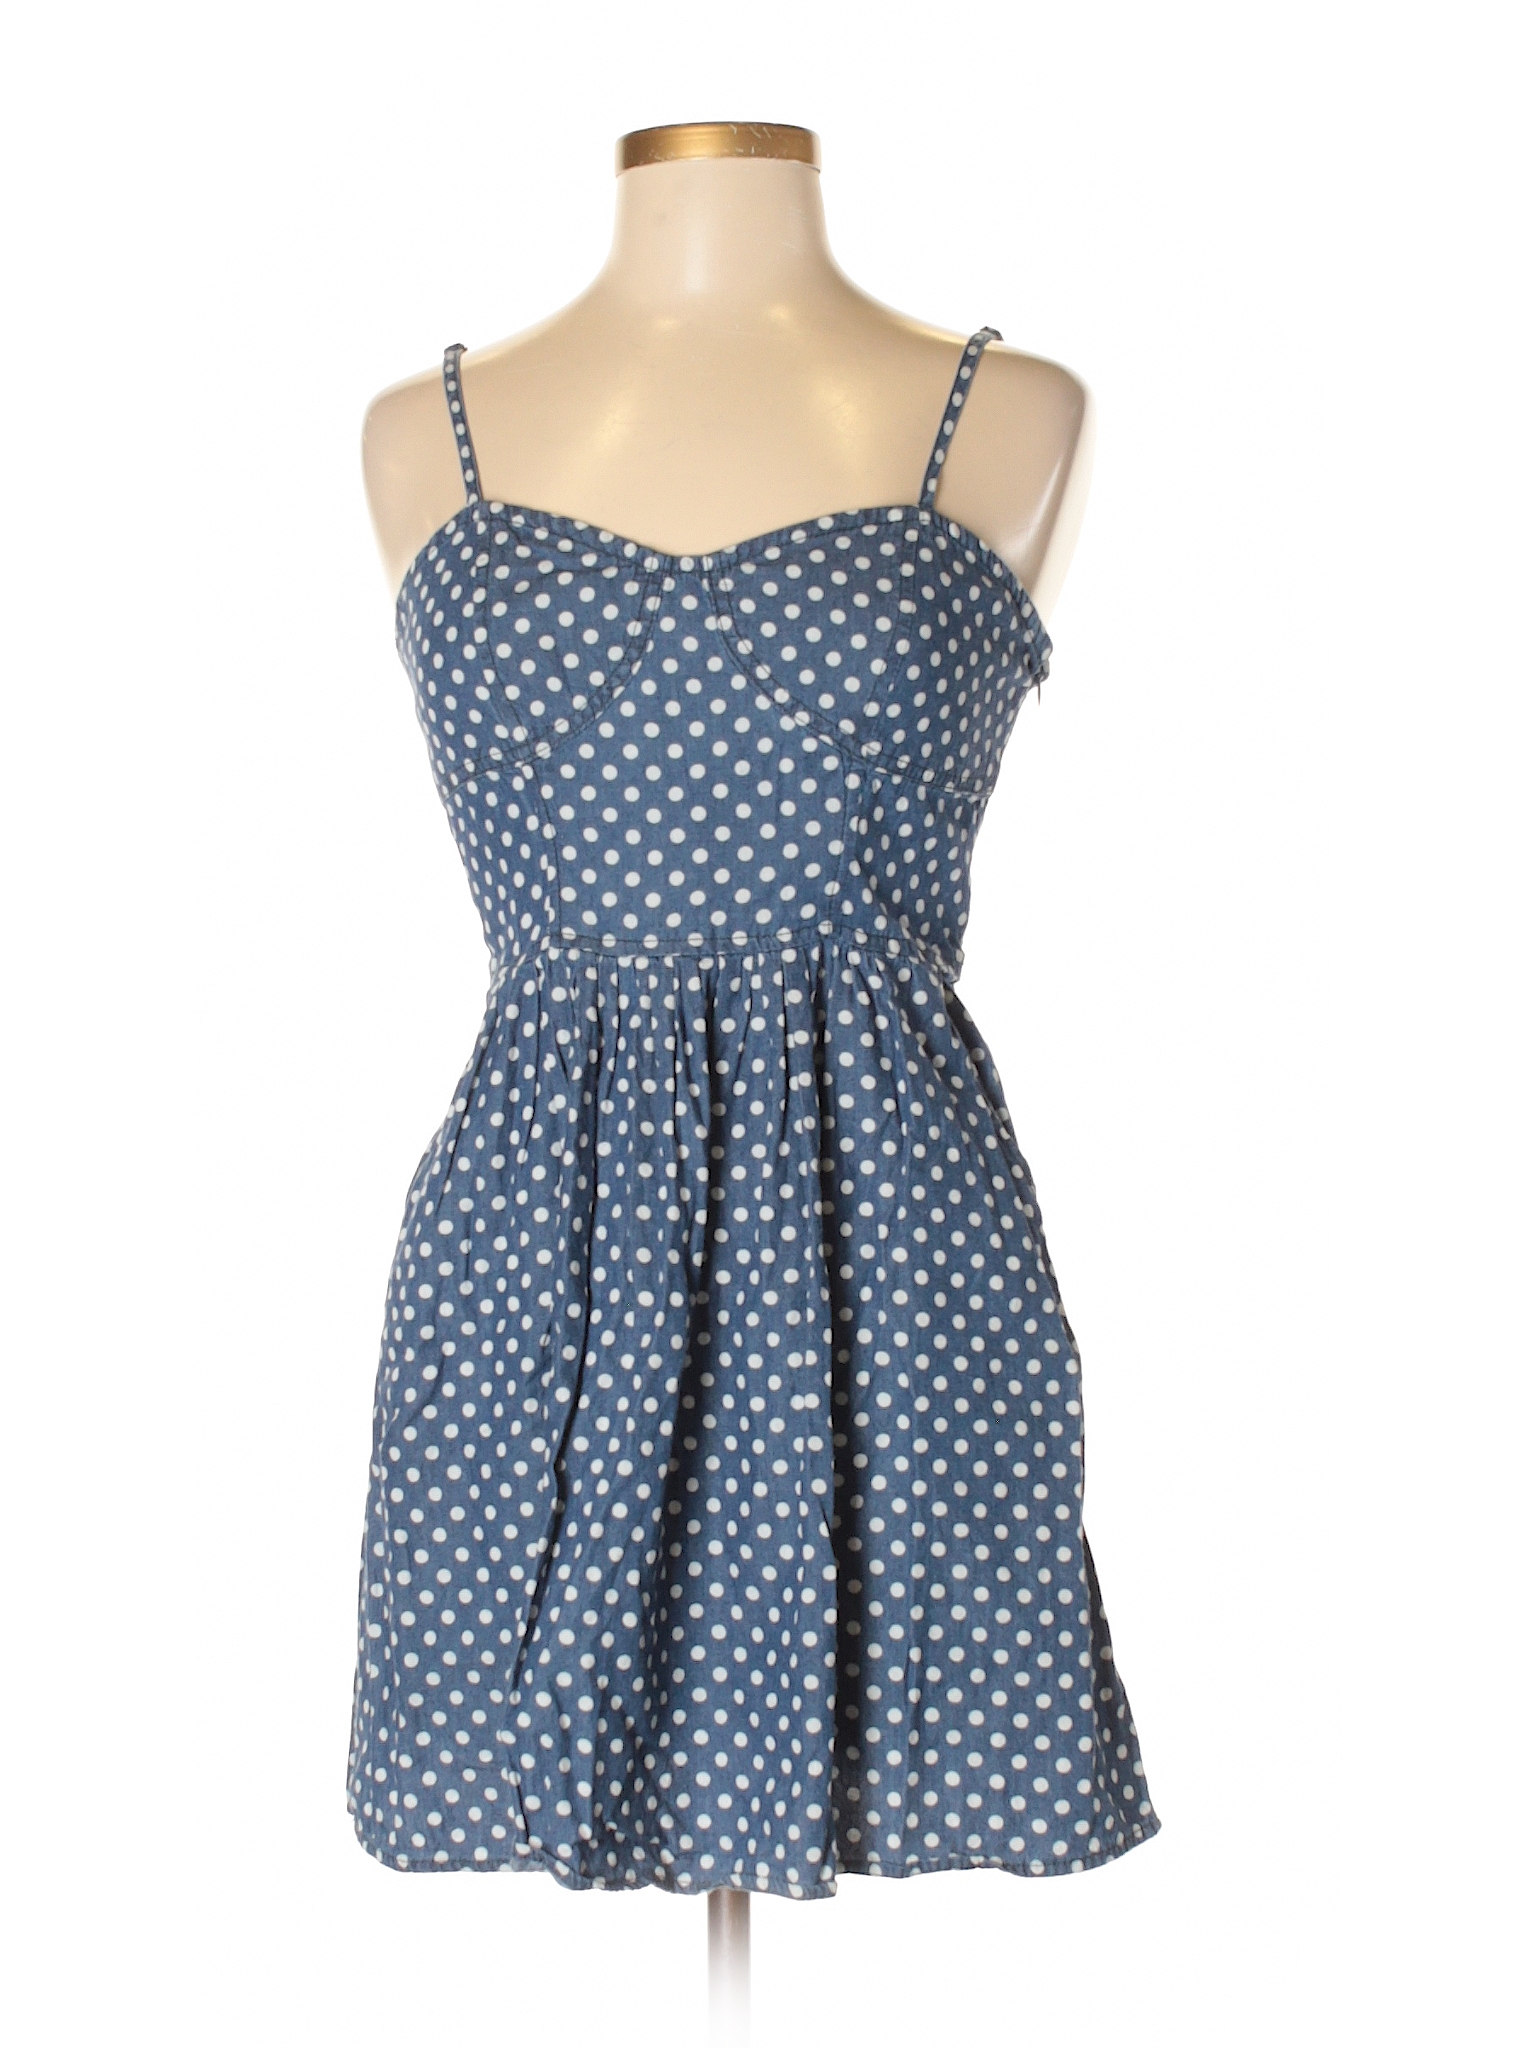 Forever 21 100% Cotton Polka Dots Dark Blue Casual Dress Size M - 37% ...